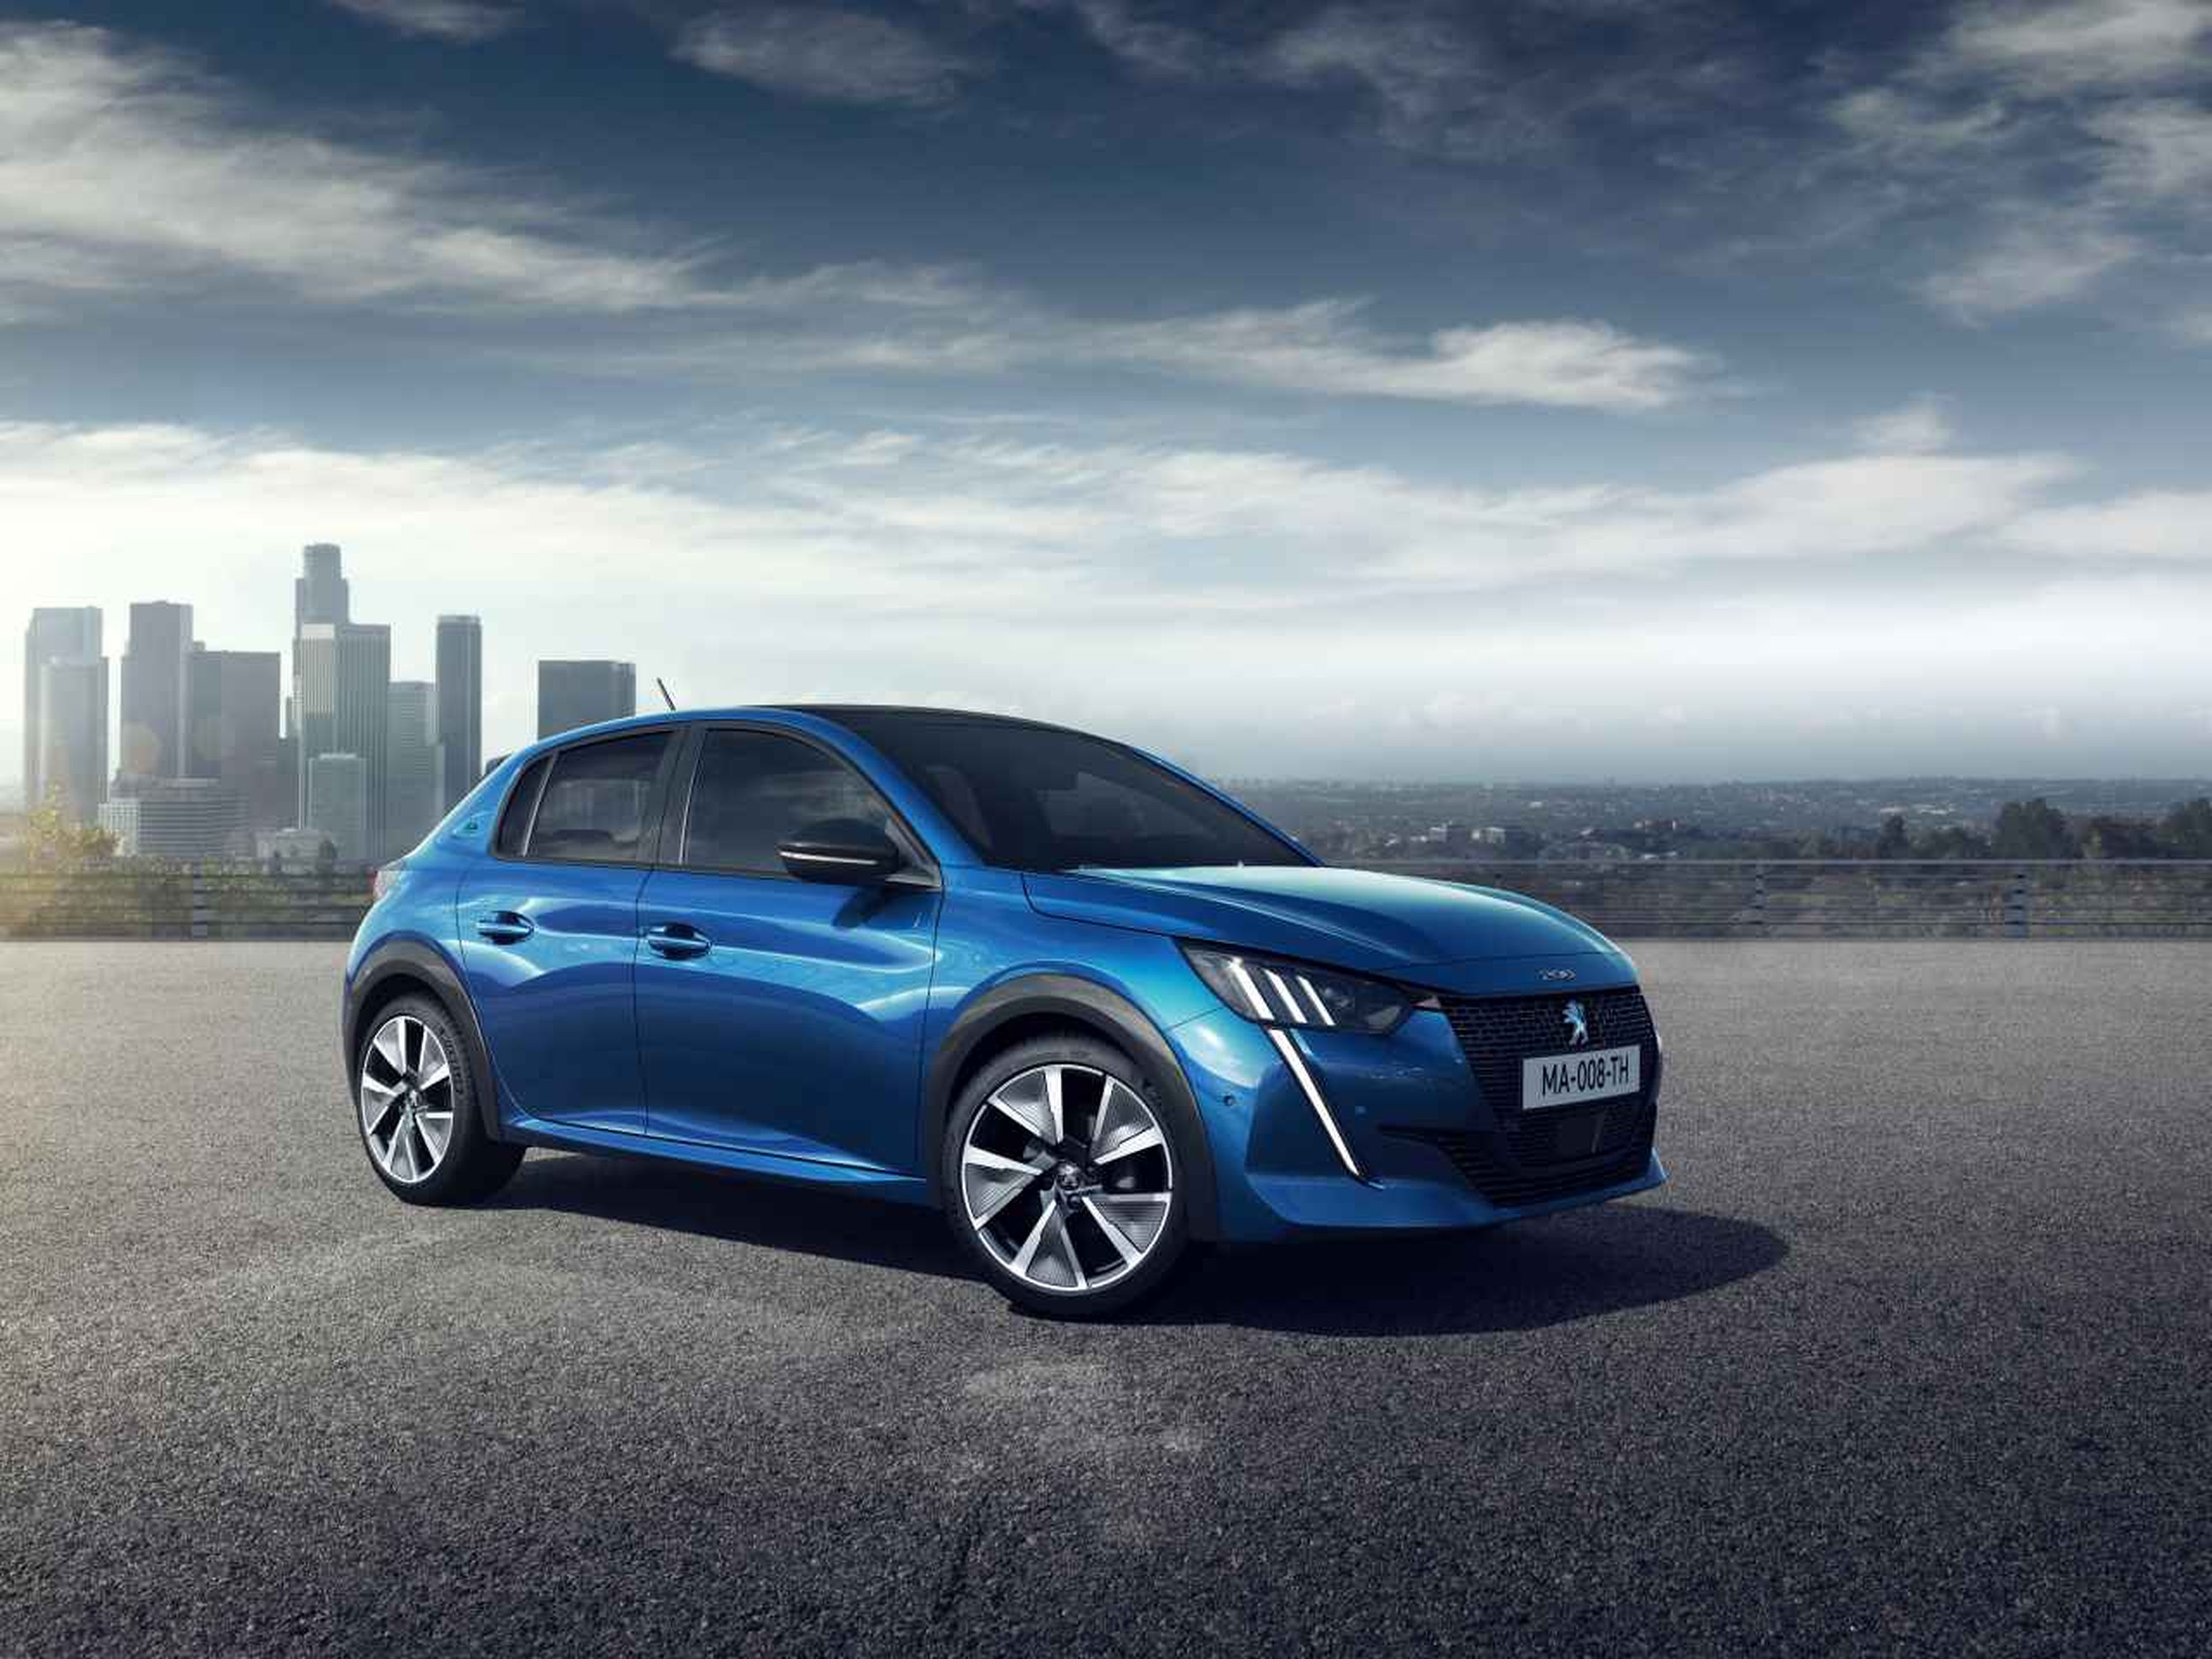 Peugeot 208 lateral-frontal